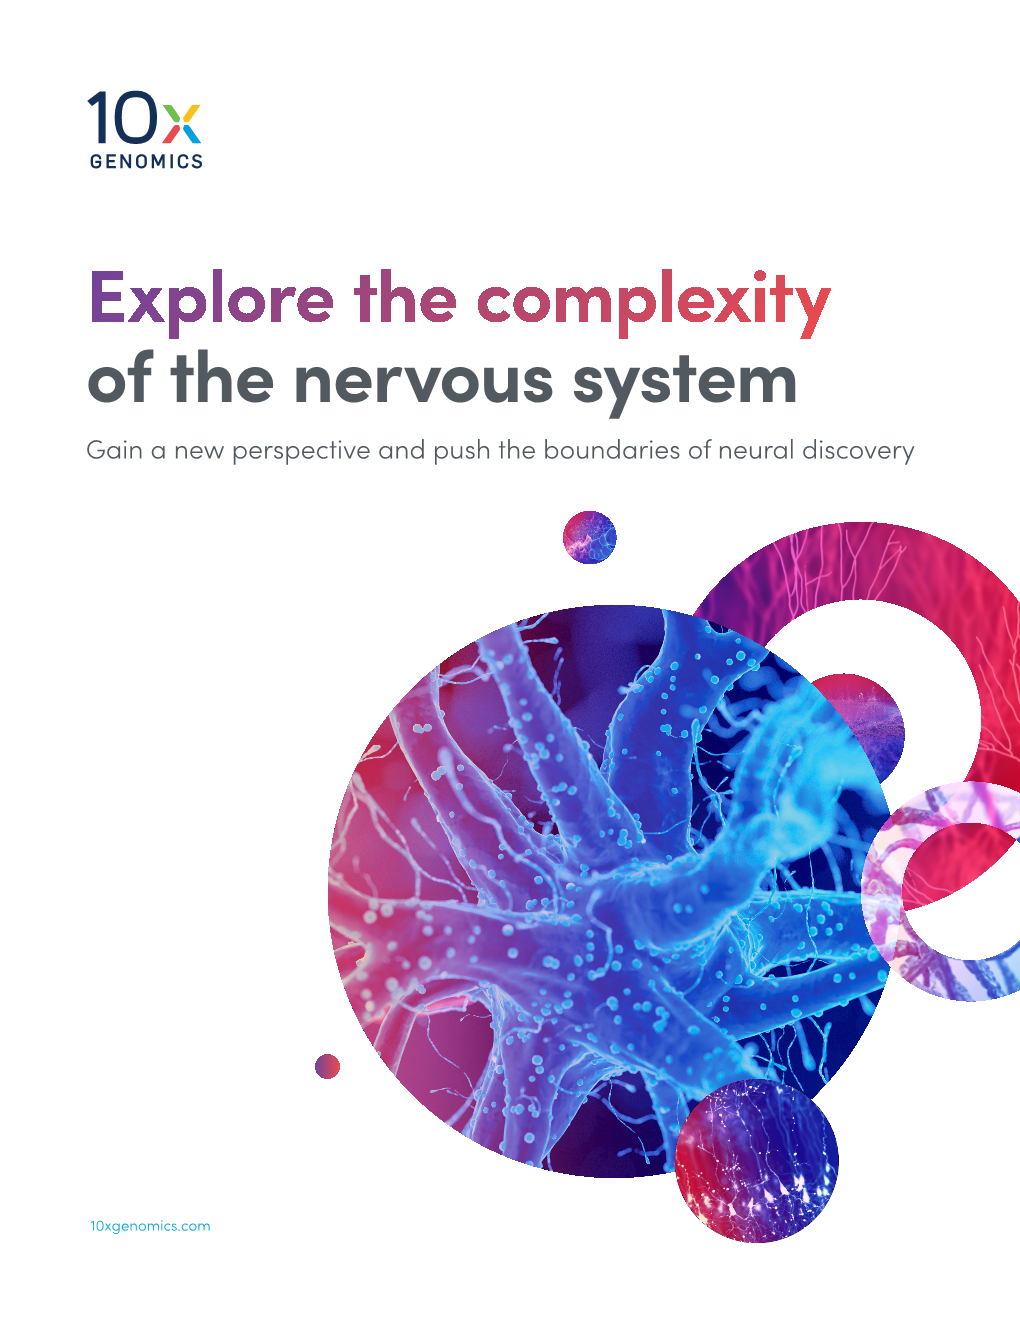 Explore the Complexity of the Nervous System Gain a New Perspective and Push the Boundaries of Neural Discovery